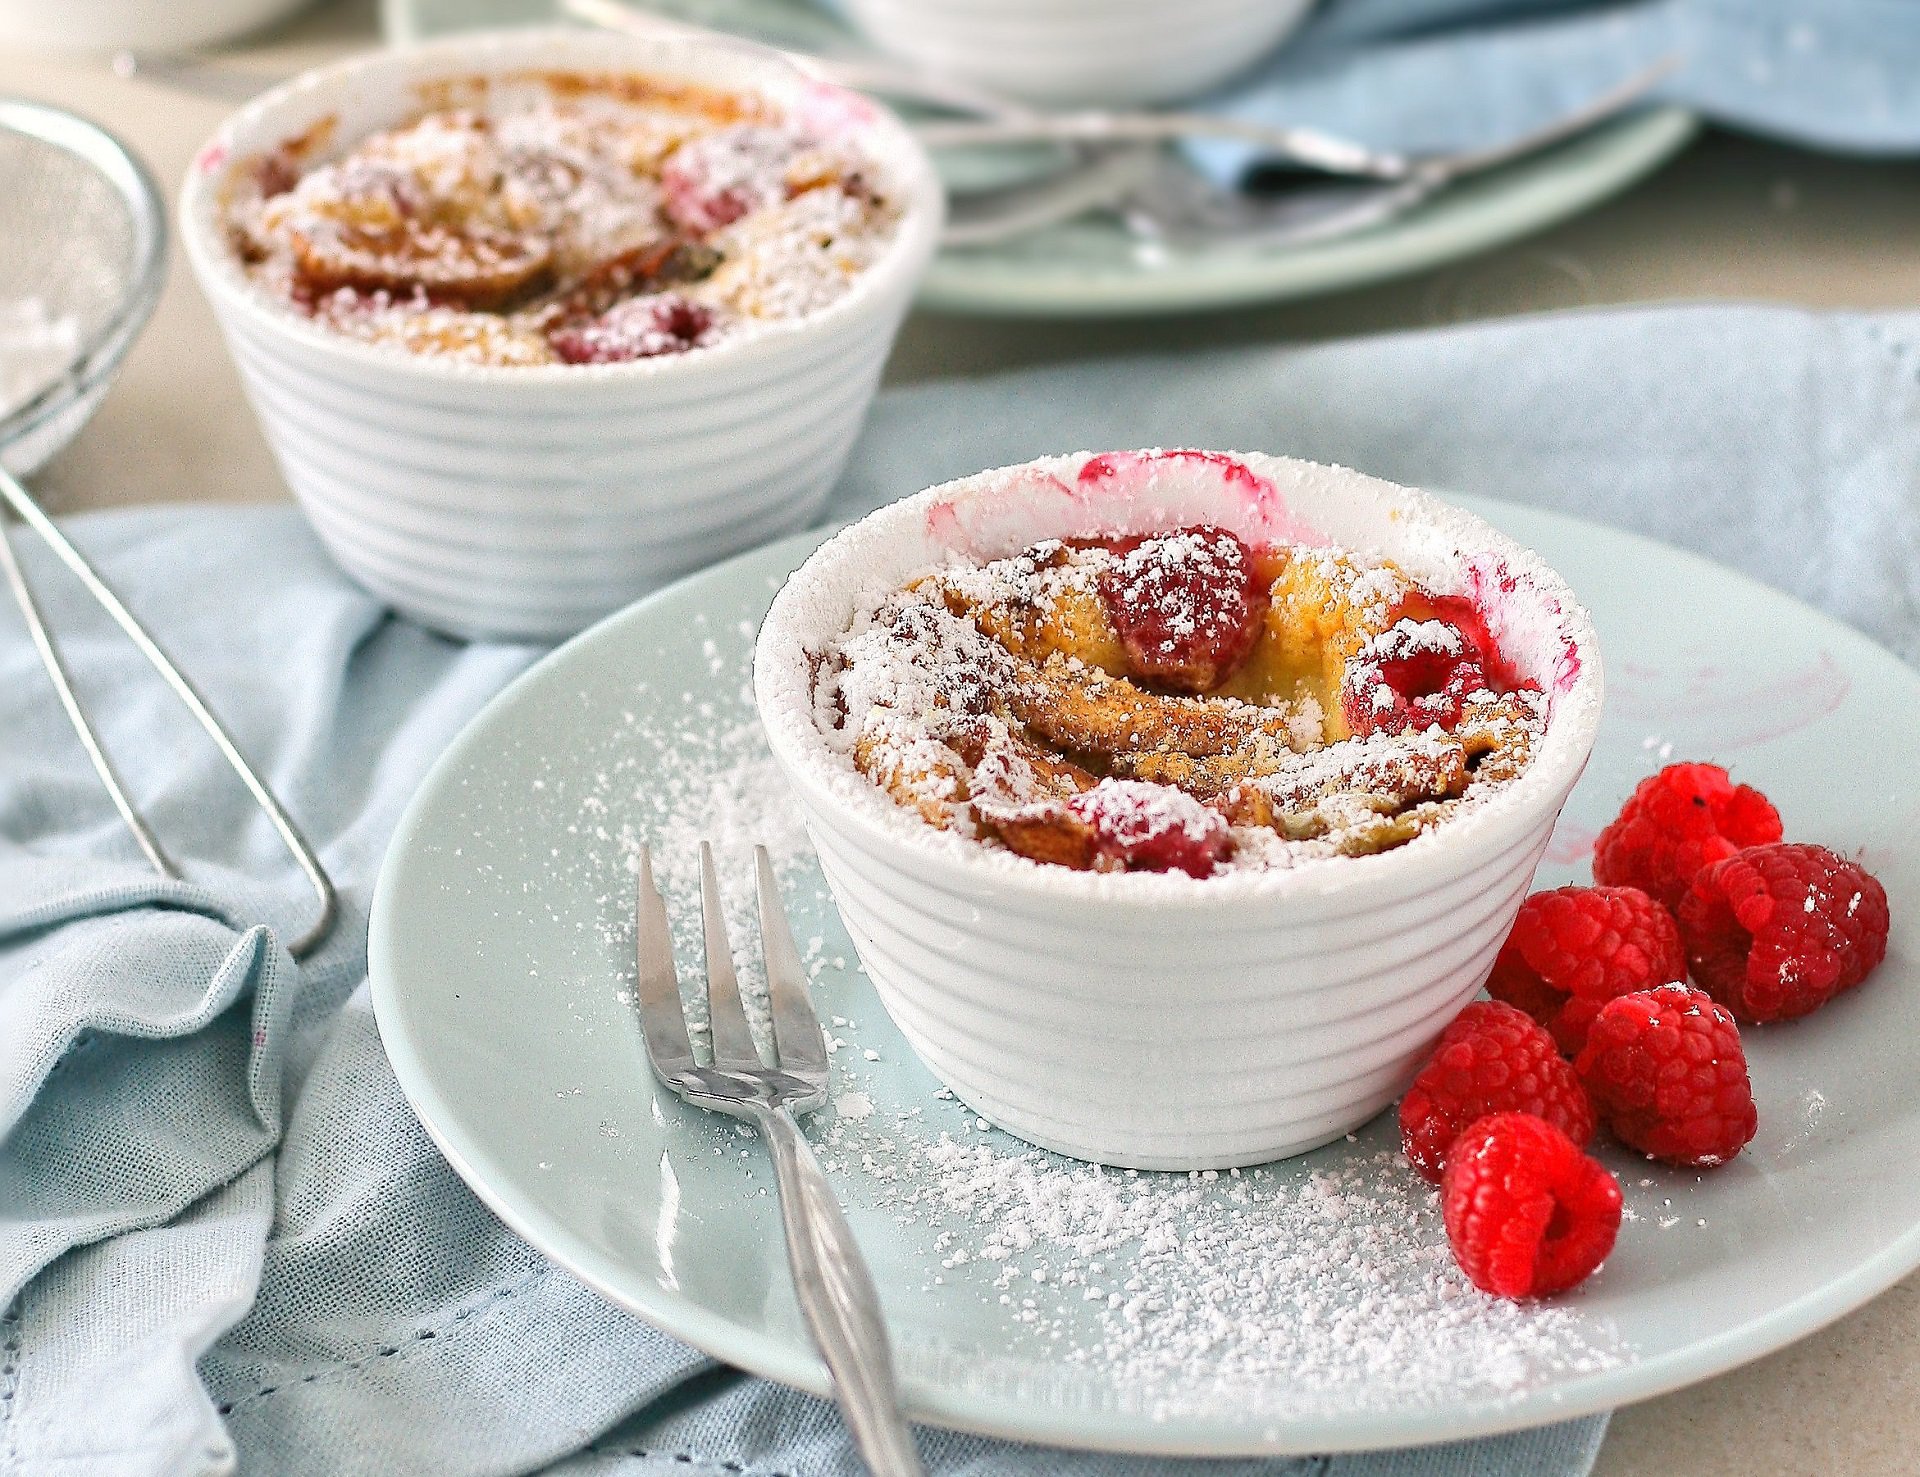 MINI APPLE- AND BERRY CLAFOUTIS